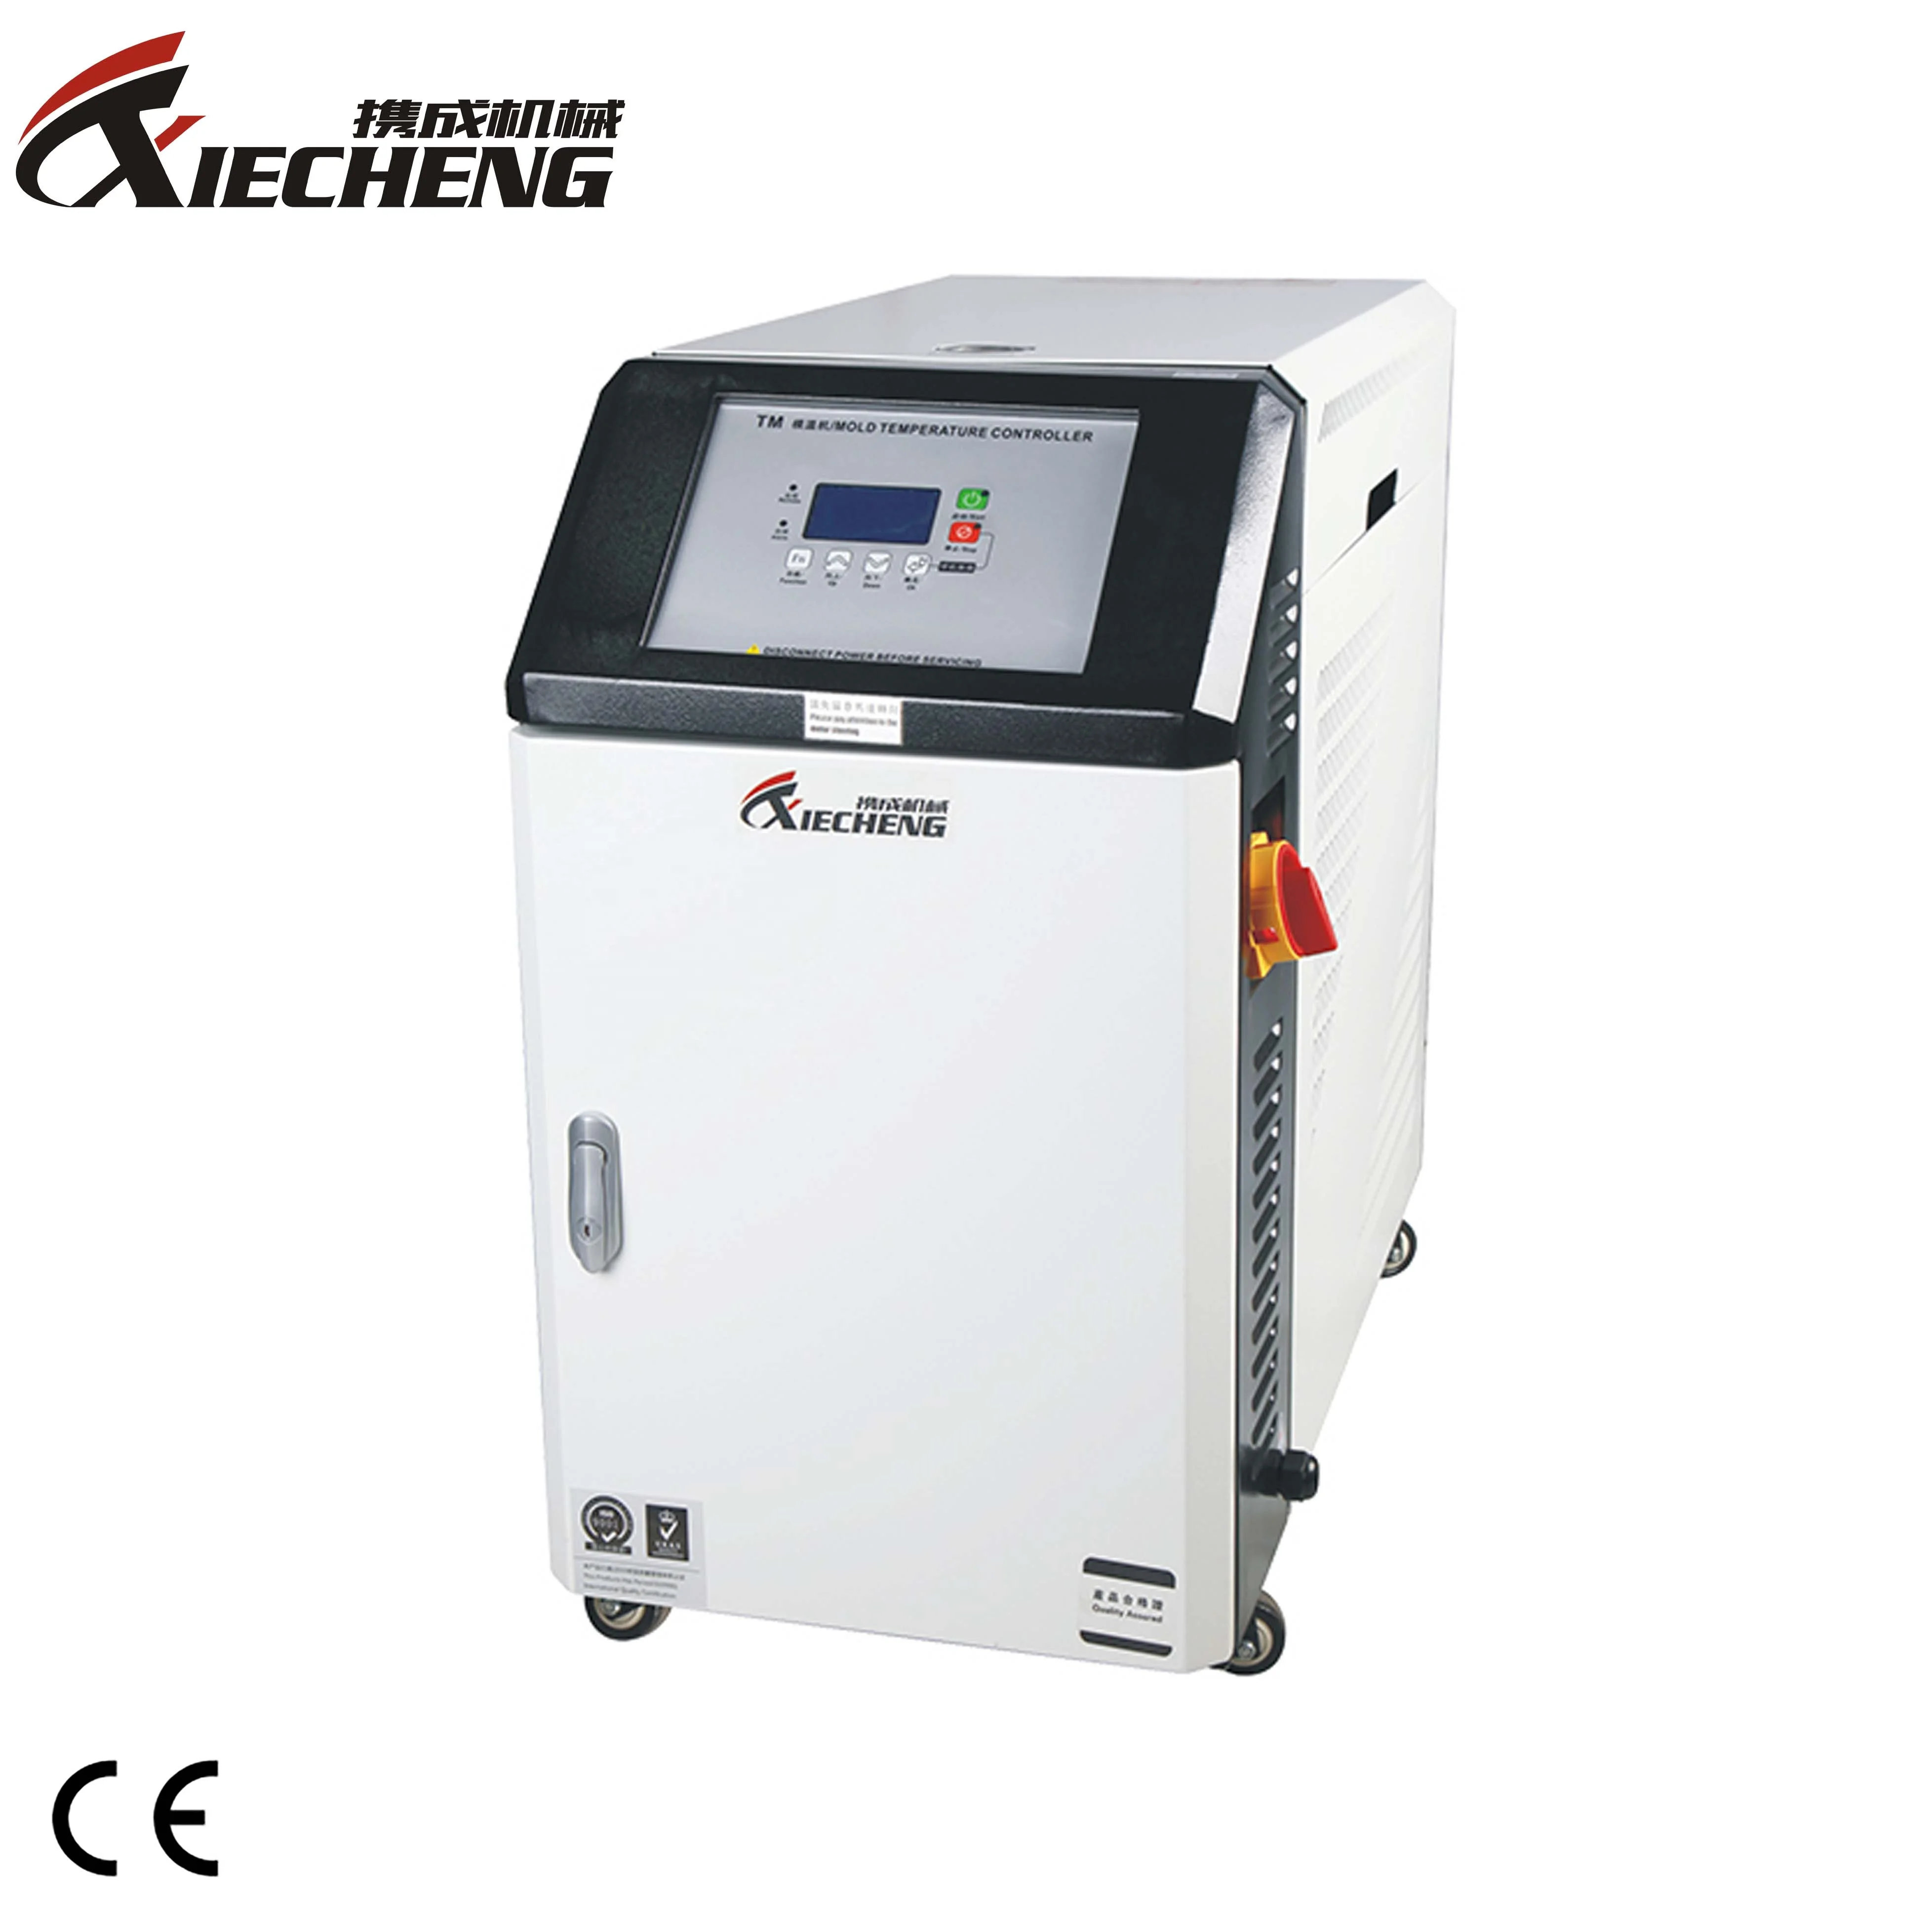 Mini Injection MTC Industry PID Hot Press Machine Mold Temperature Controller (62367297891)